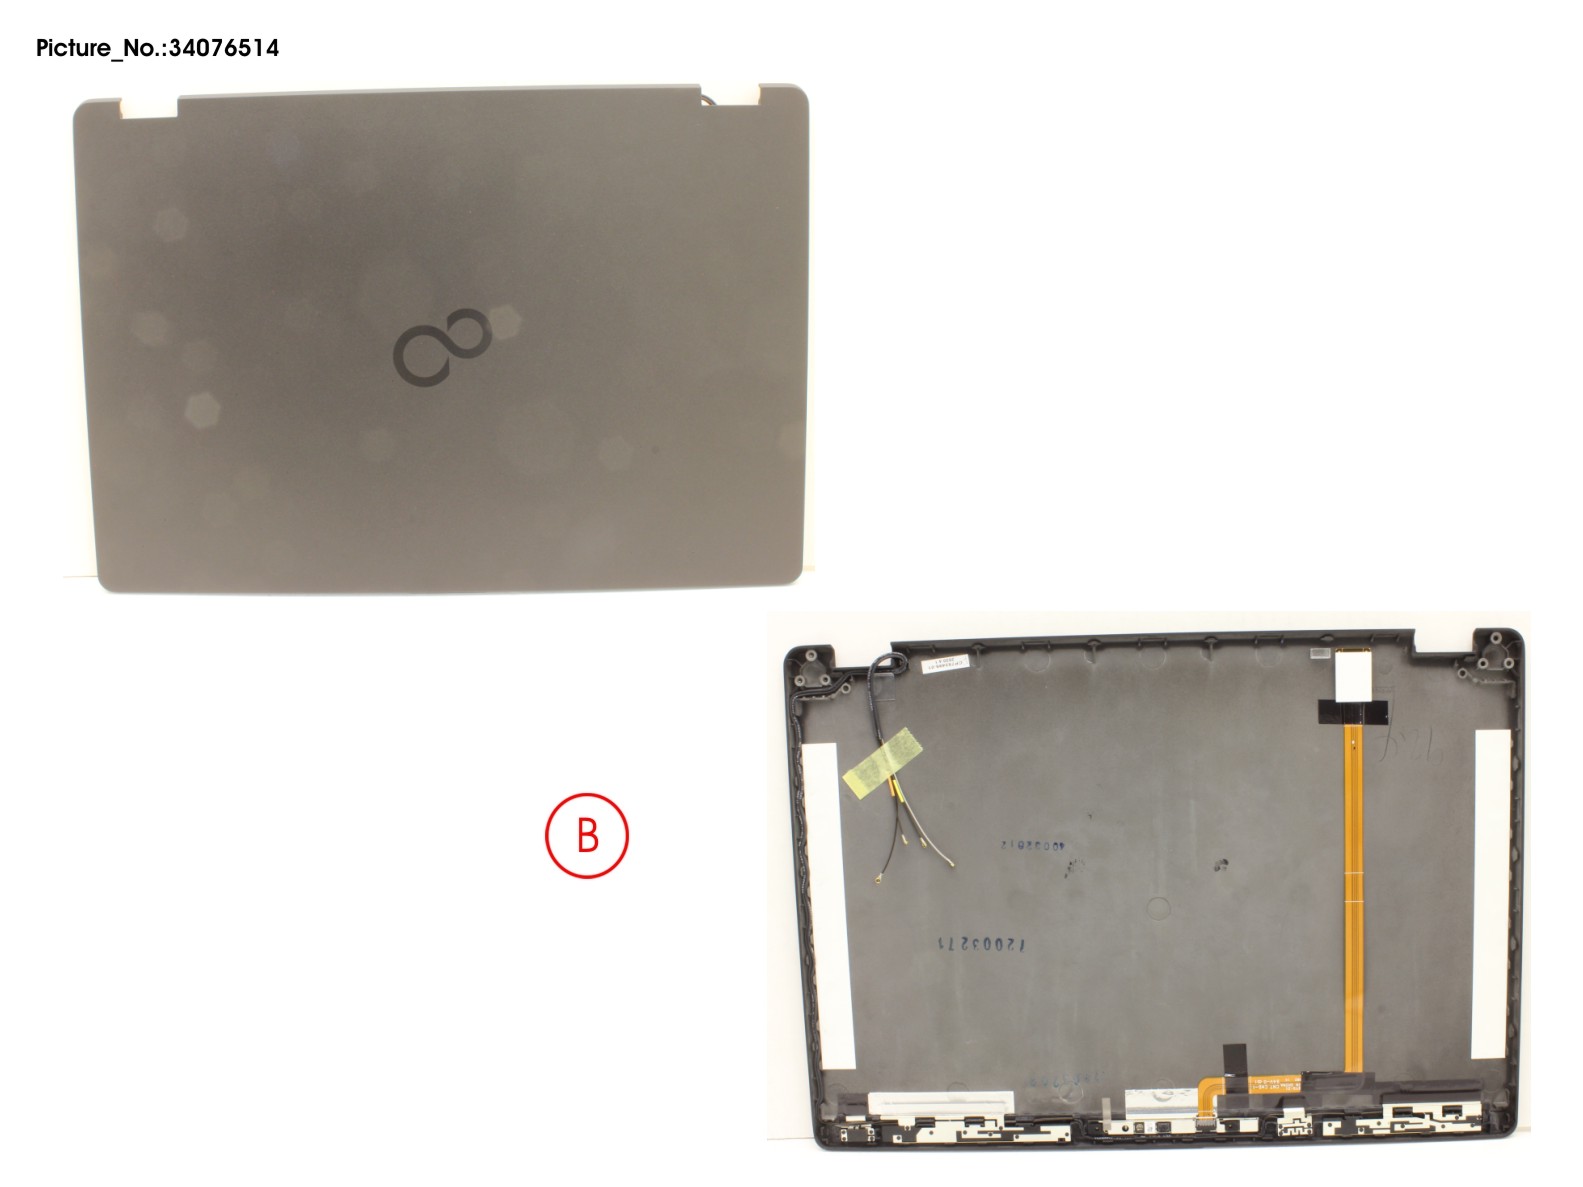 LCD BACK COVER ASSY